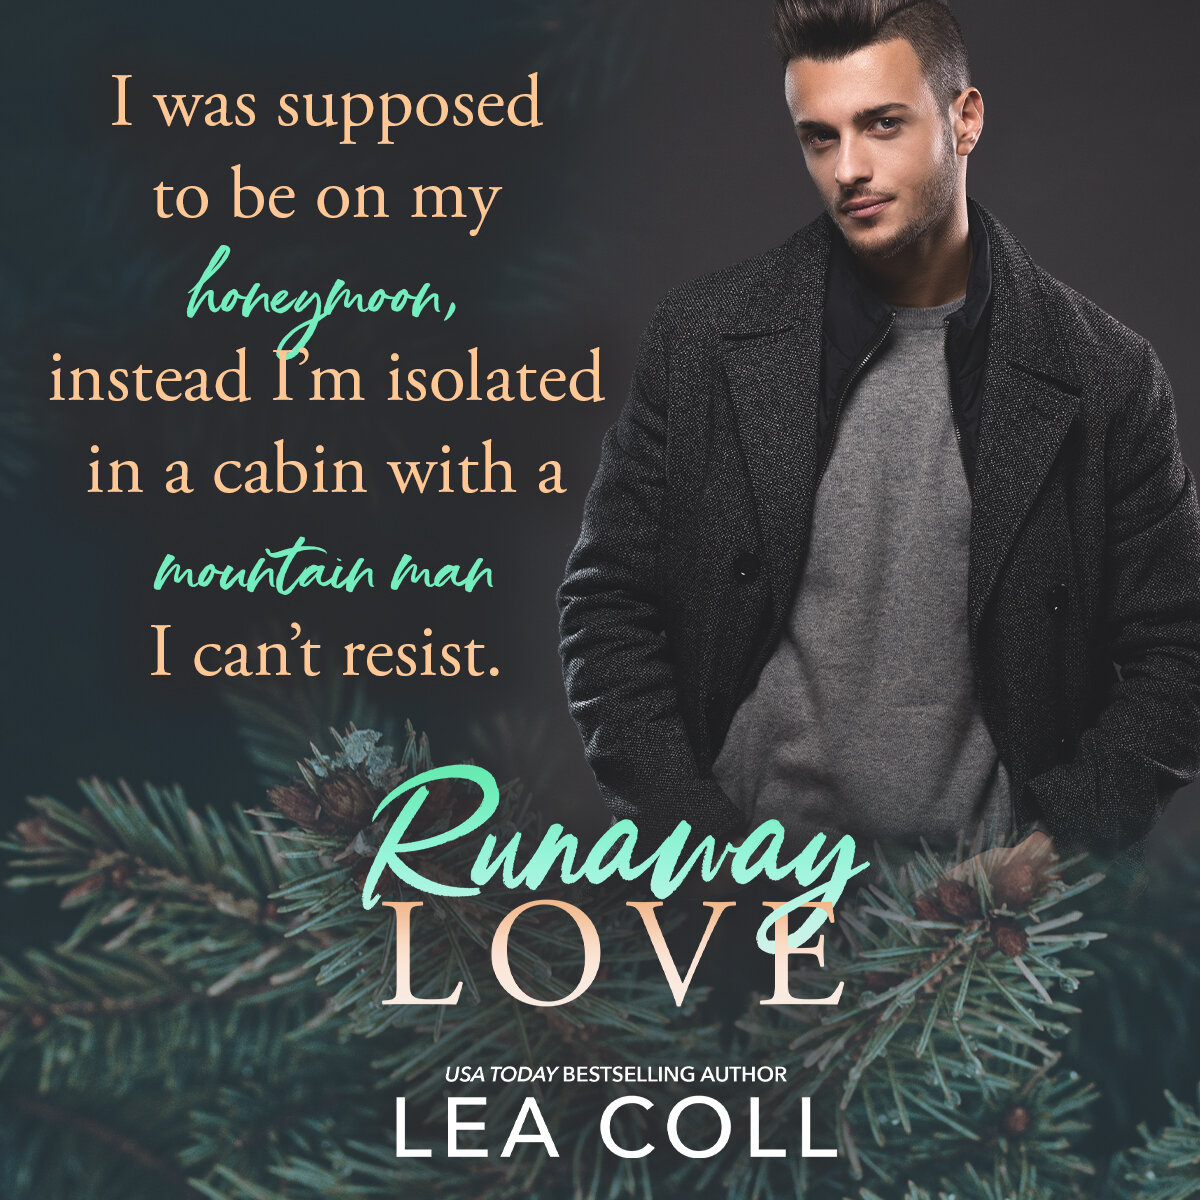 #NEW “If you want a beautifully written book with all the feels & wonderful, lovable characters, you need to read this!!” Runaway Love by Lea Coll #TheMonroeBrothers amzn.to/40ufkJ8